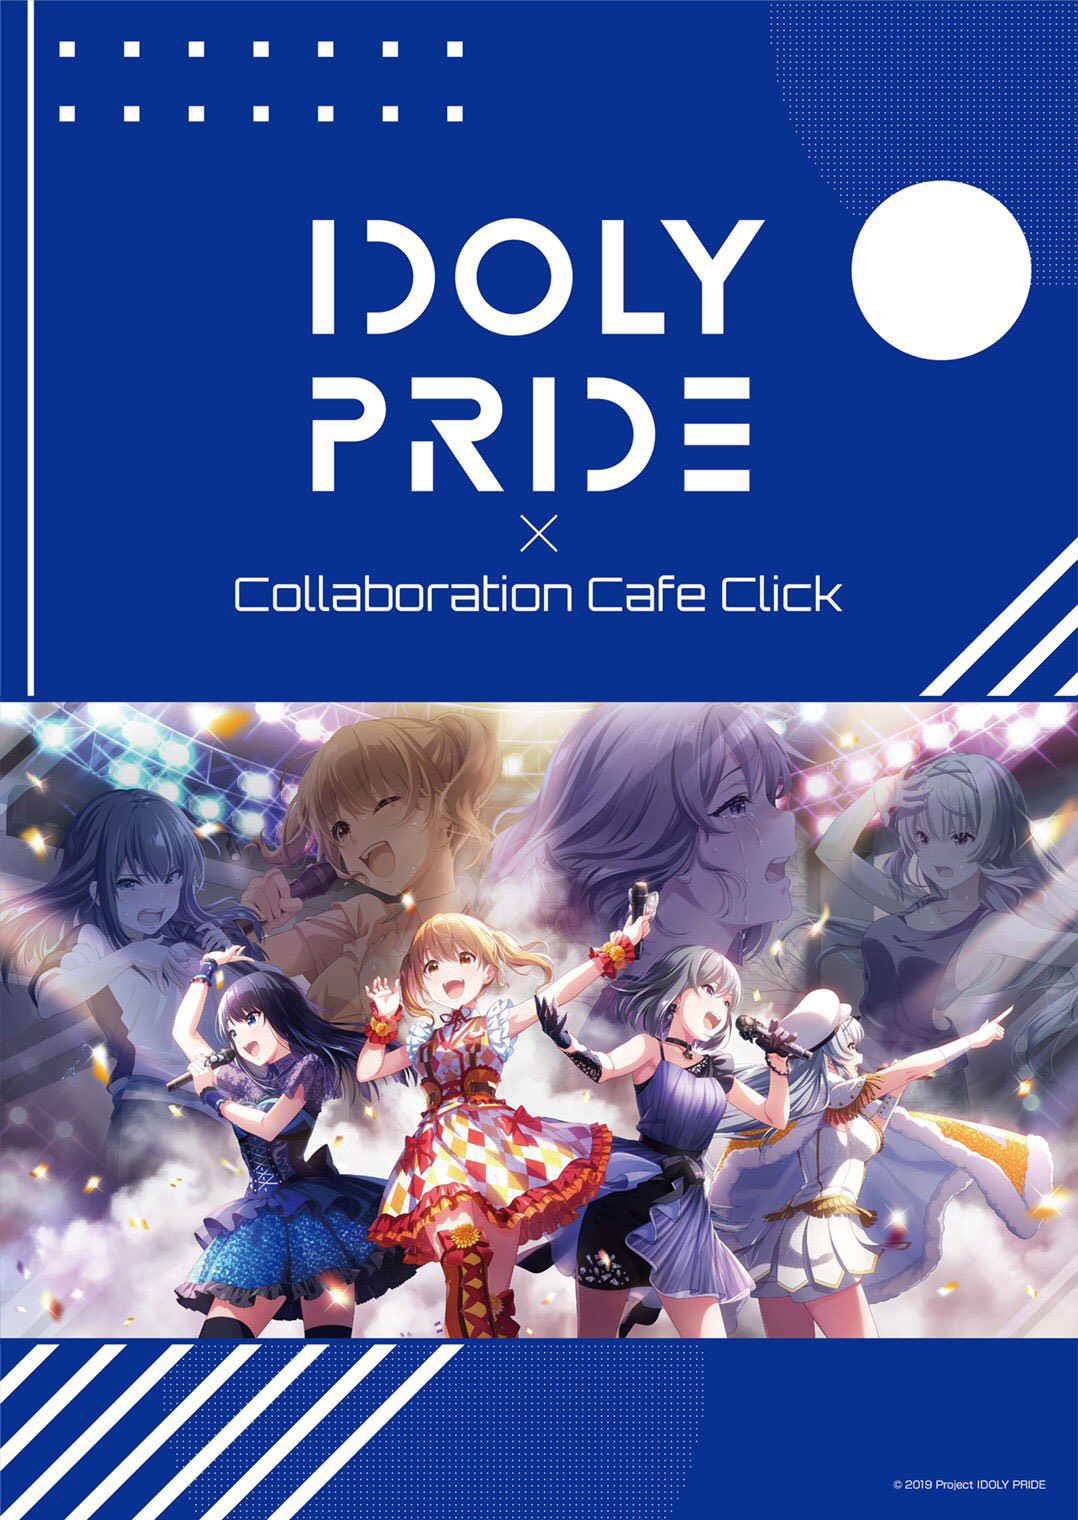 IDOLY PRIDE×Collaboration Cafe Click